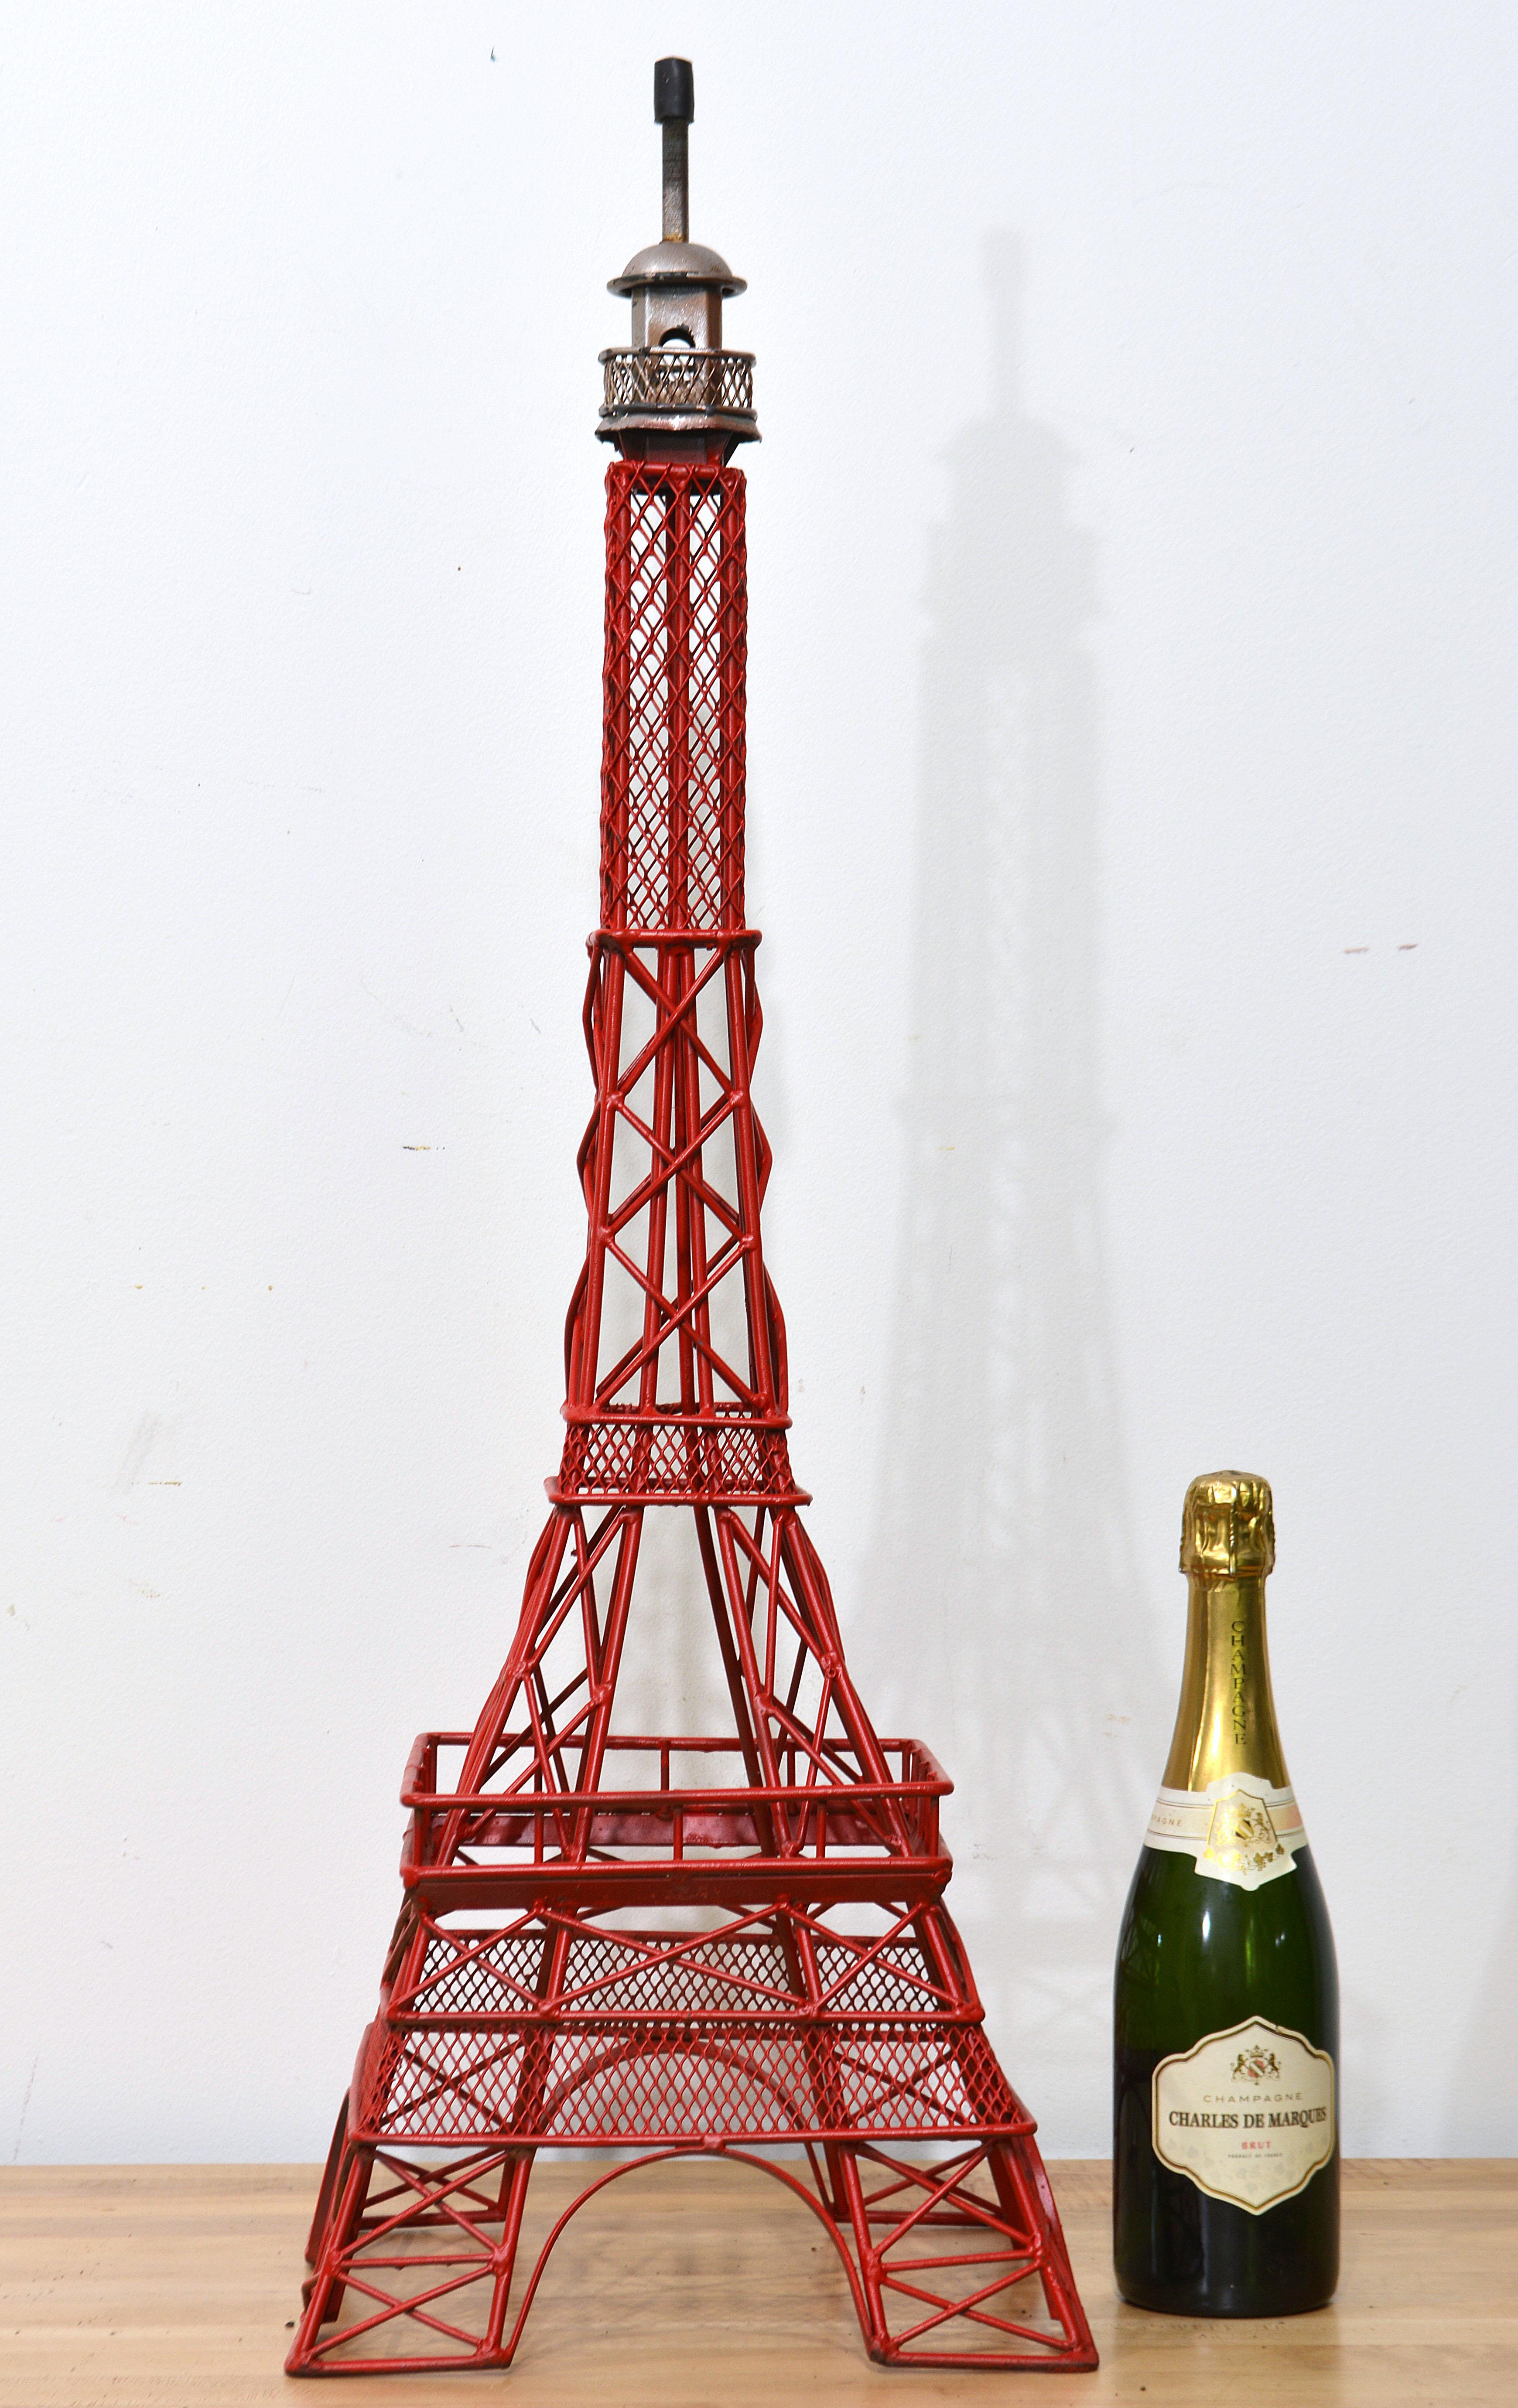 Standing 34.5 inches tall this beautiflly crafted architectural sculpture inspired by the Eifel Tower makes a great impression. An intricate system of diagonal and straight welded steel bars reaches upwards to the small octagonal domed pavillion